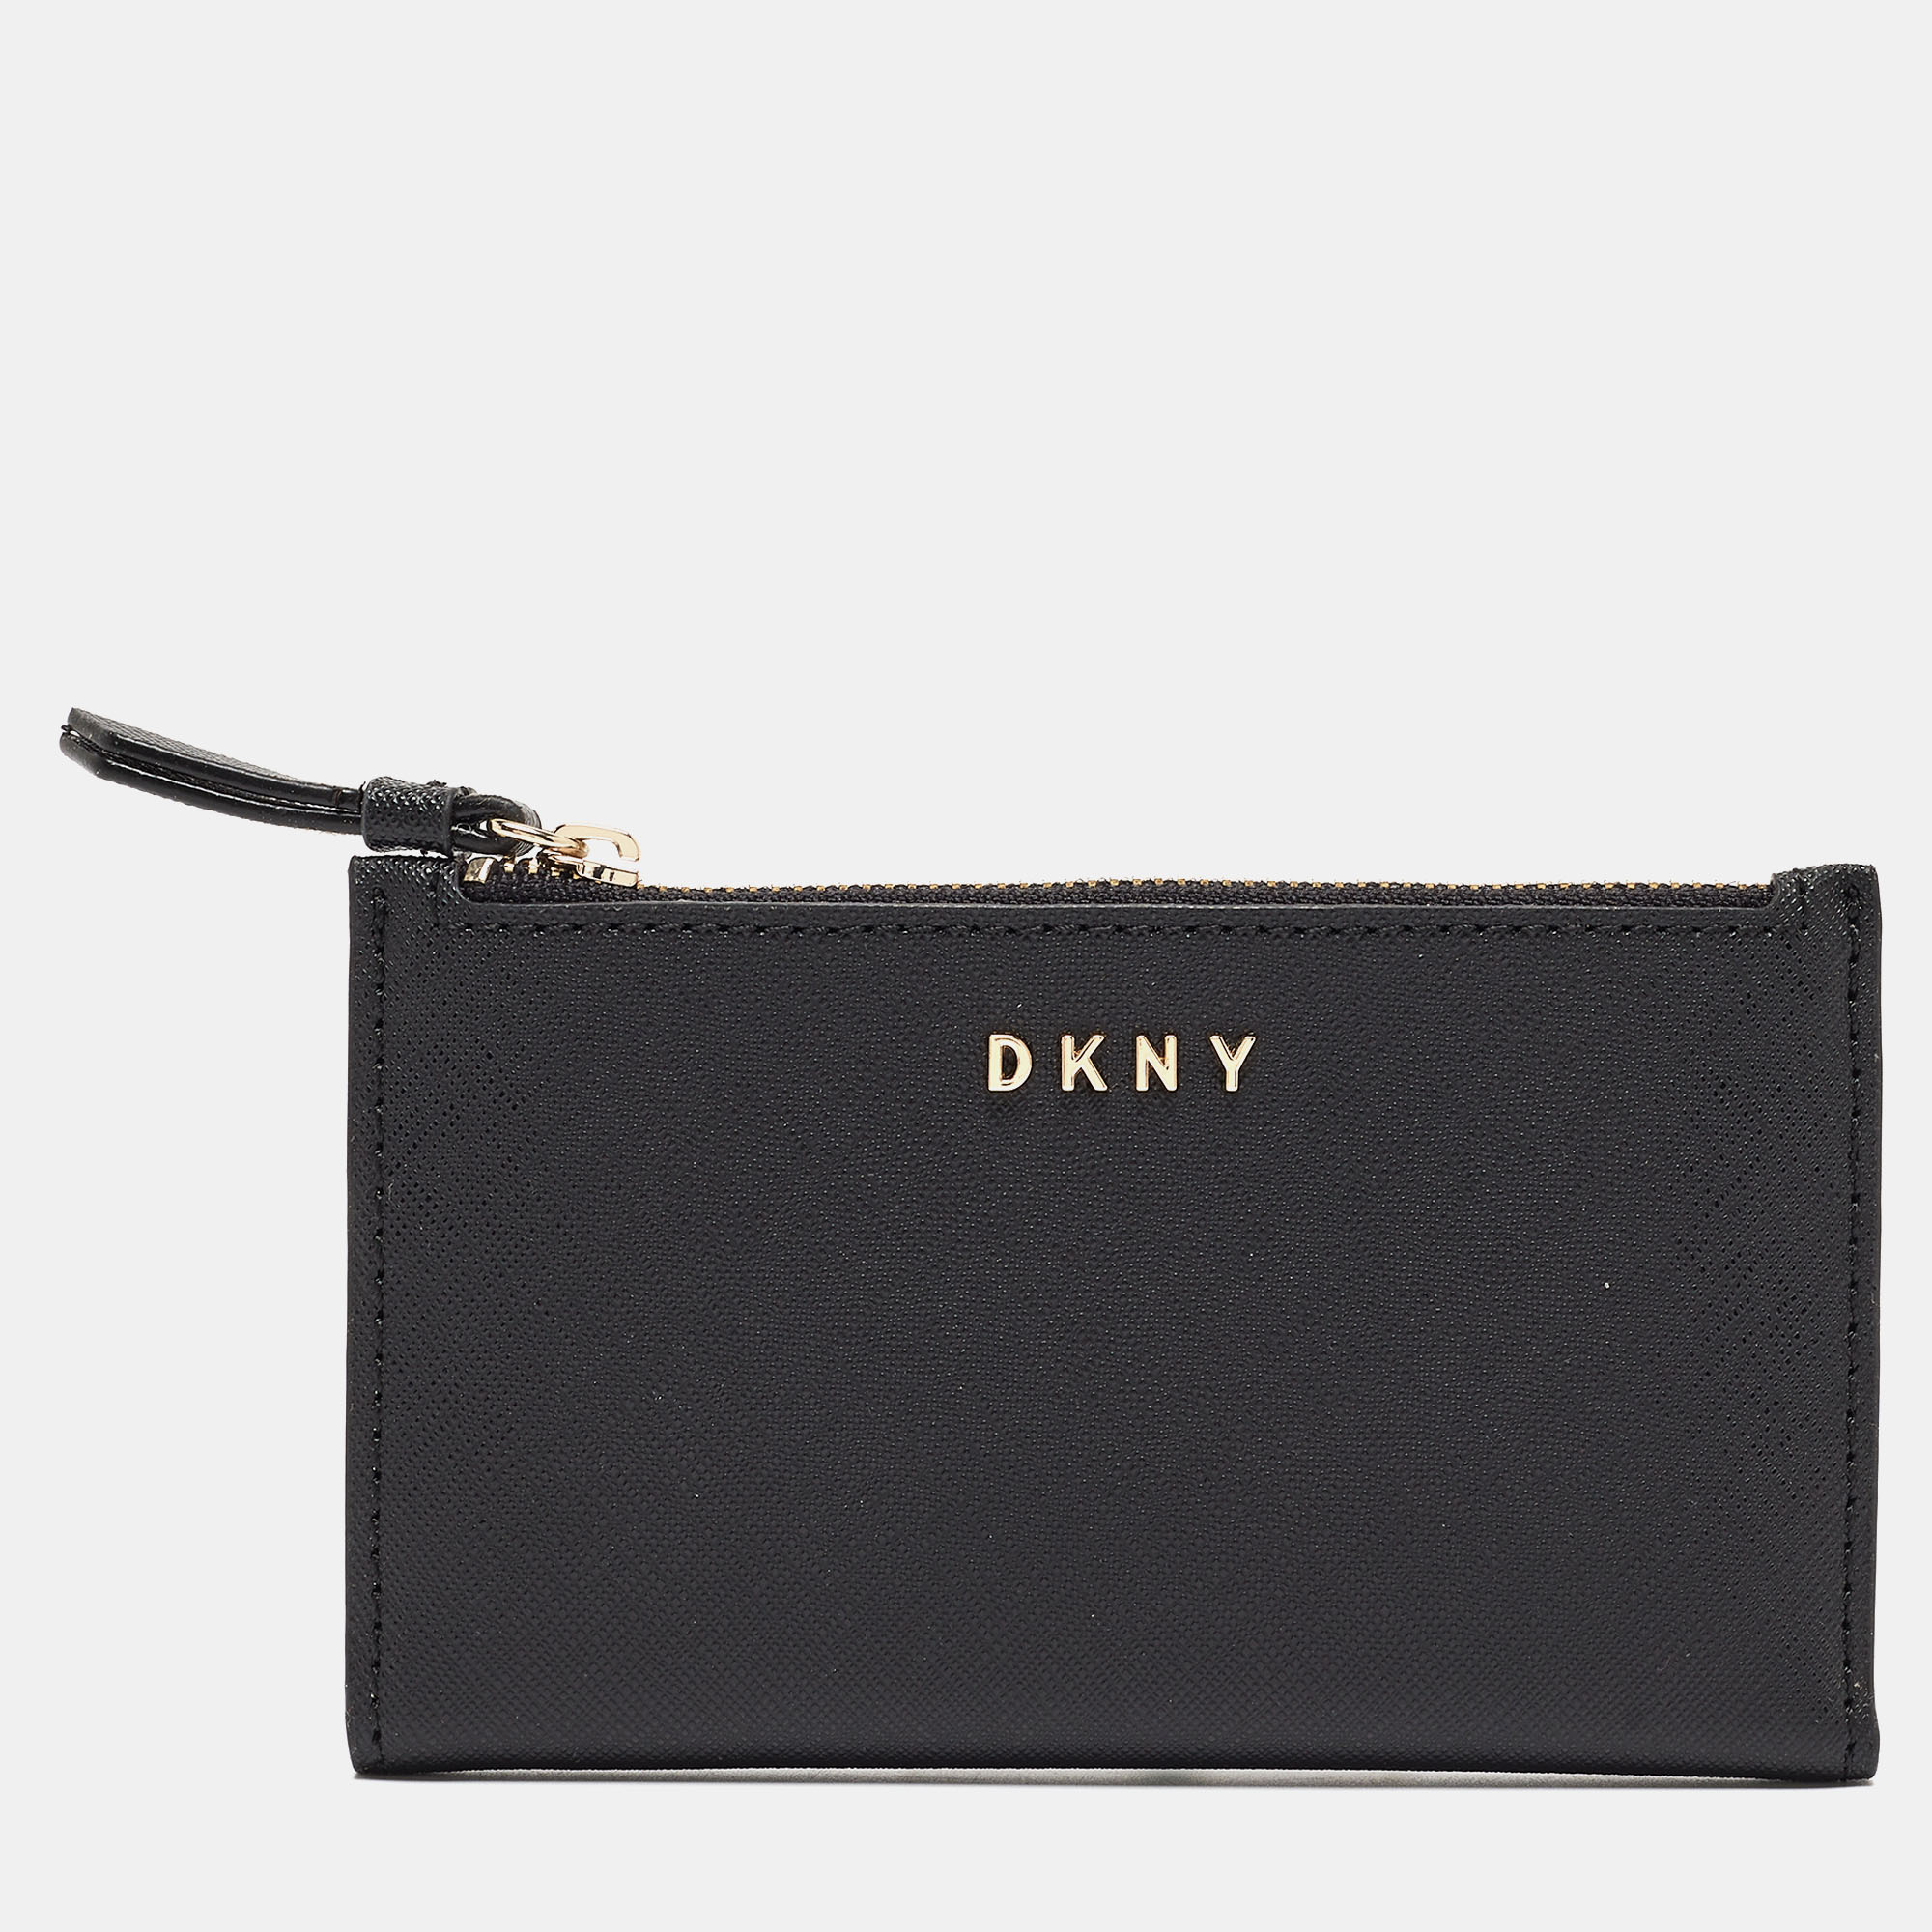 

DKNY Black Leather Bryant Park Compact Wallet